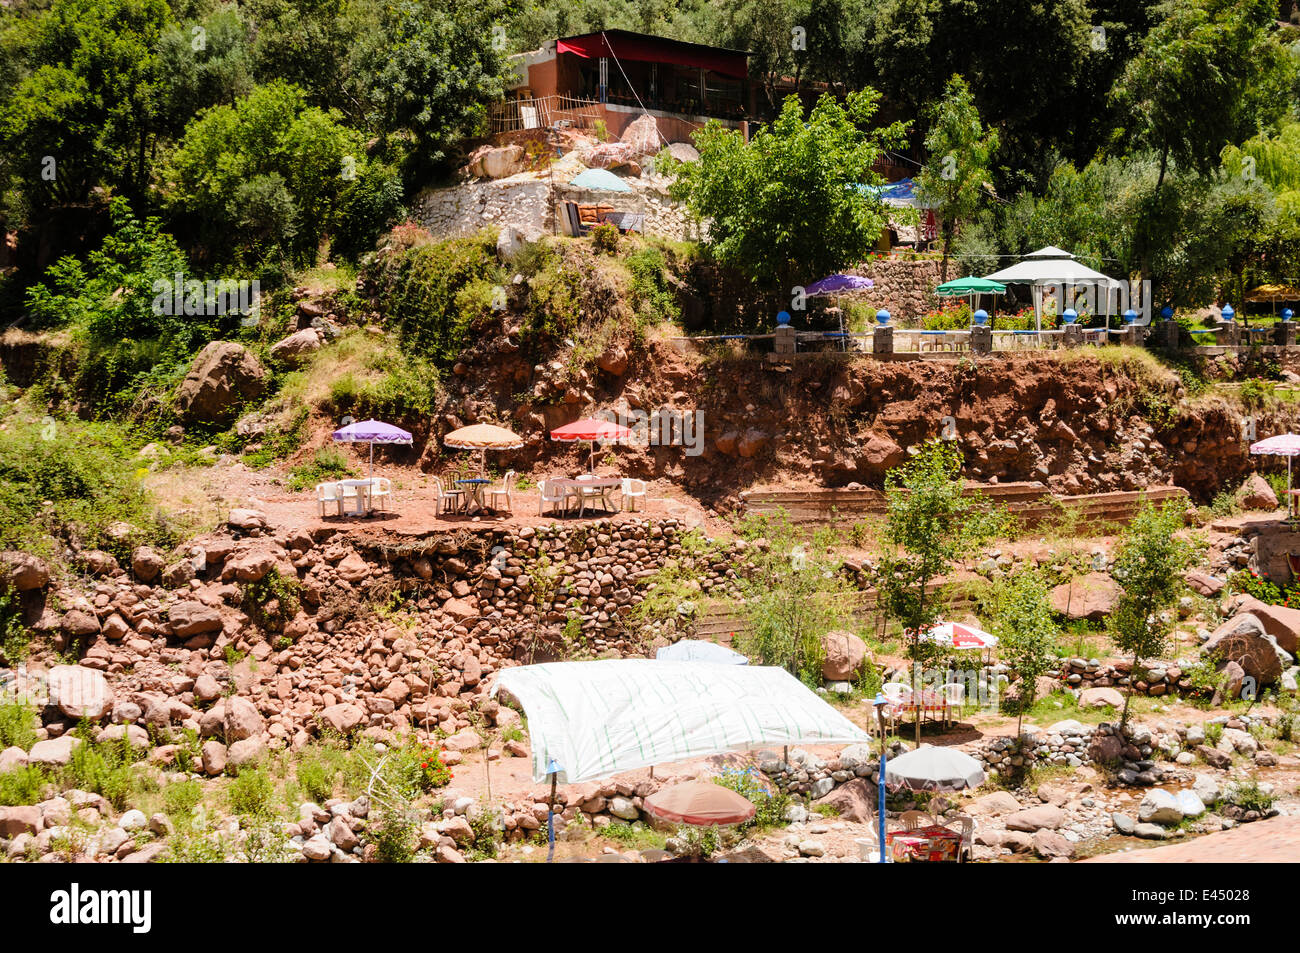 Plastic patio tables, chairs with parasols at restaurants on the banks of the Ourika River, Ourika Valley, Atlas Mountains, Morocco Stock Photo